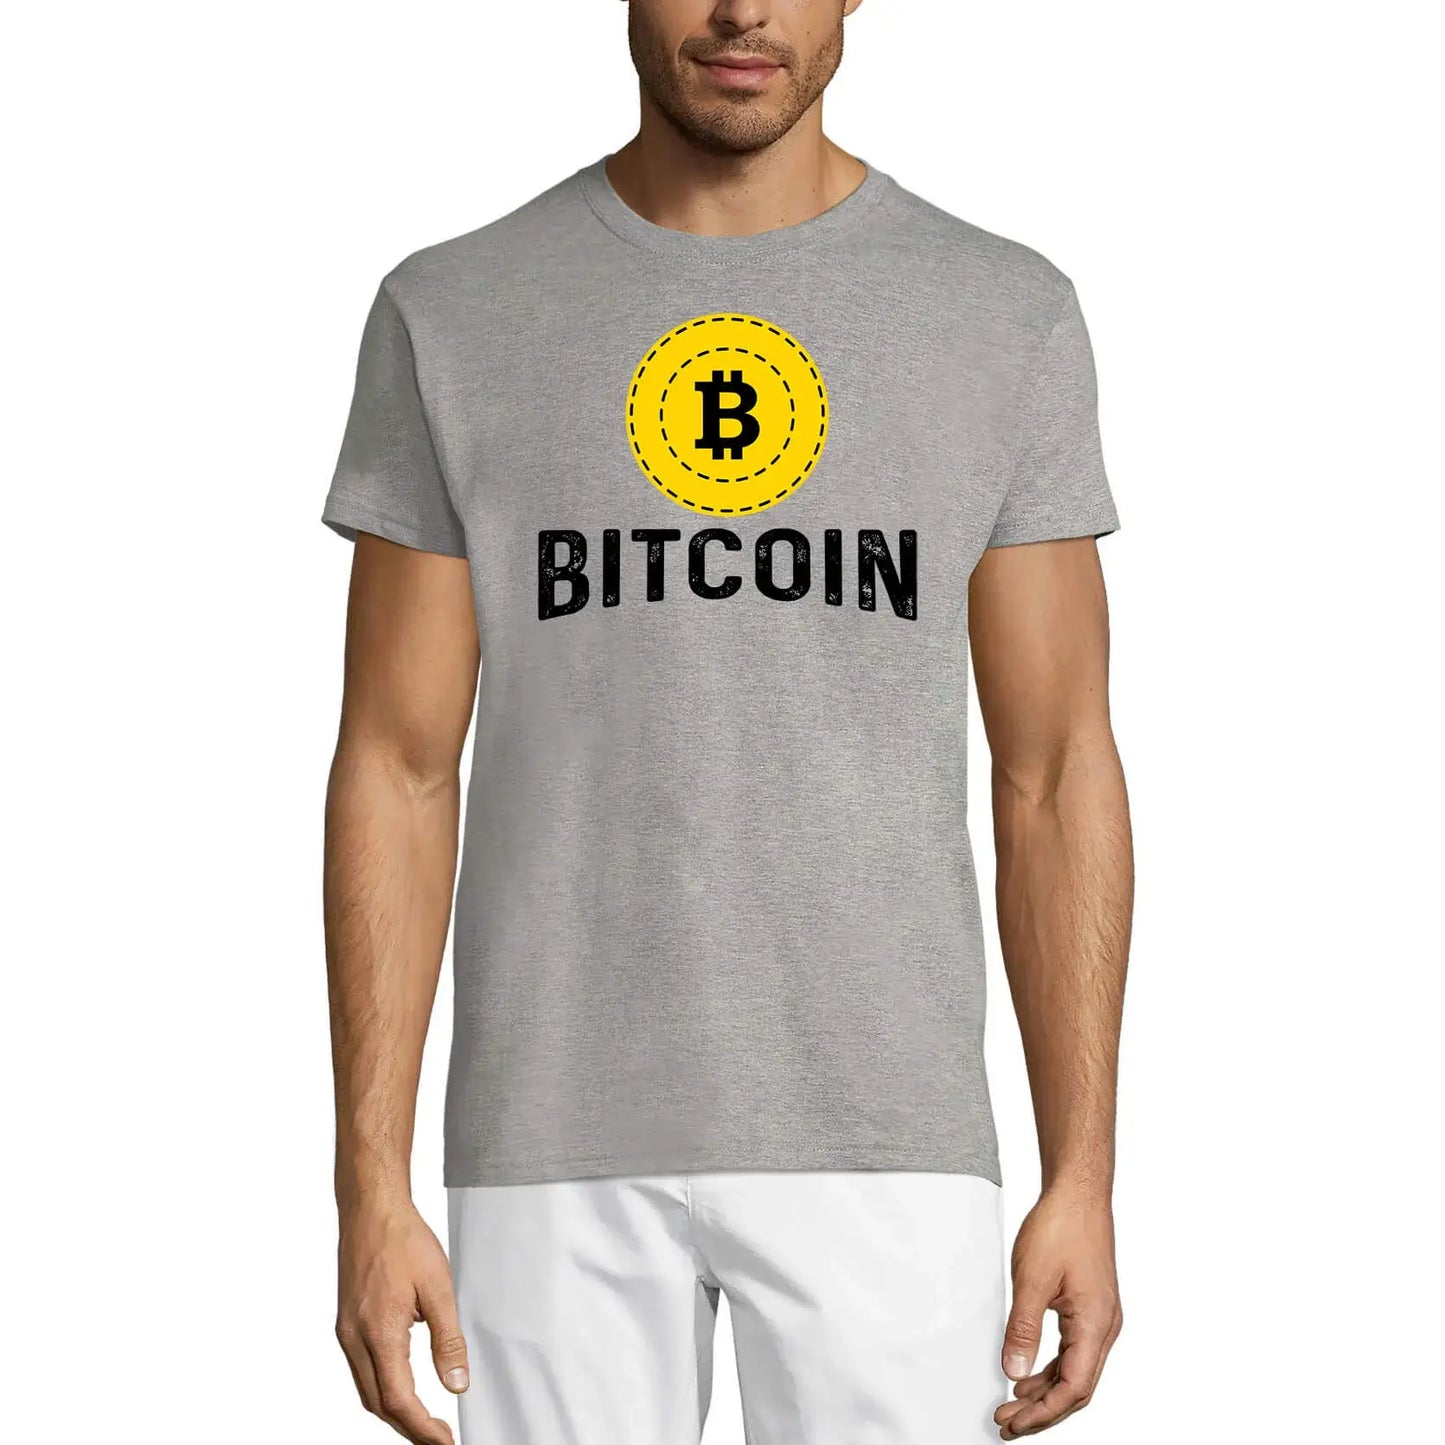 Men's Graphic T-Shirt Bitcoin Cryptocurrency - One Coin Funny - Blockchain Eco-Friendly Limited Edition Short Sleeve Tee-Shirt Vintage Birthday Gift Novelty